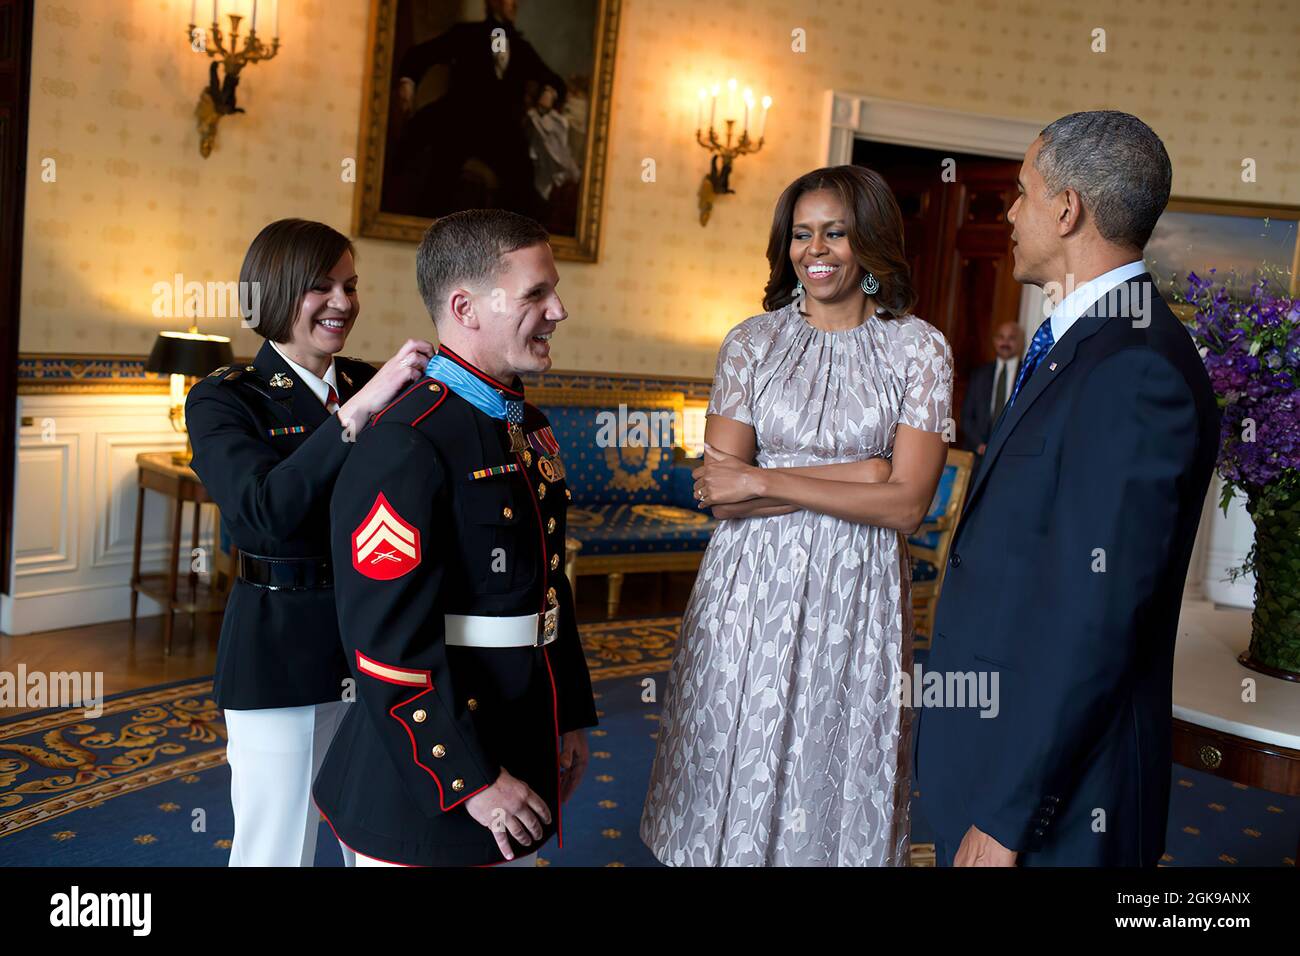 President Barack Obama and First Lady Michelle Obama talk with Corporal William 'Kyle' Carpenter, U.S. Marine Corps (Ret.) in the Blue Room following a Medal of Honor ceremony in the East Room of the White House, June 19, 2014. Cpl. Carpenter received the Medal of Honor for his courageous actions while serving as an Automatic Rifleman with Company F, 2d Battalion, 9th Marines, Regimental Combat Team 1, 1st Marine Division (Forward), I  Marine Expeditionary Force (Forward), in Helmand Province, Afghanistan. (Official White House Photo by Pete Souza) This official White House photograph is being Stock Photo